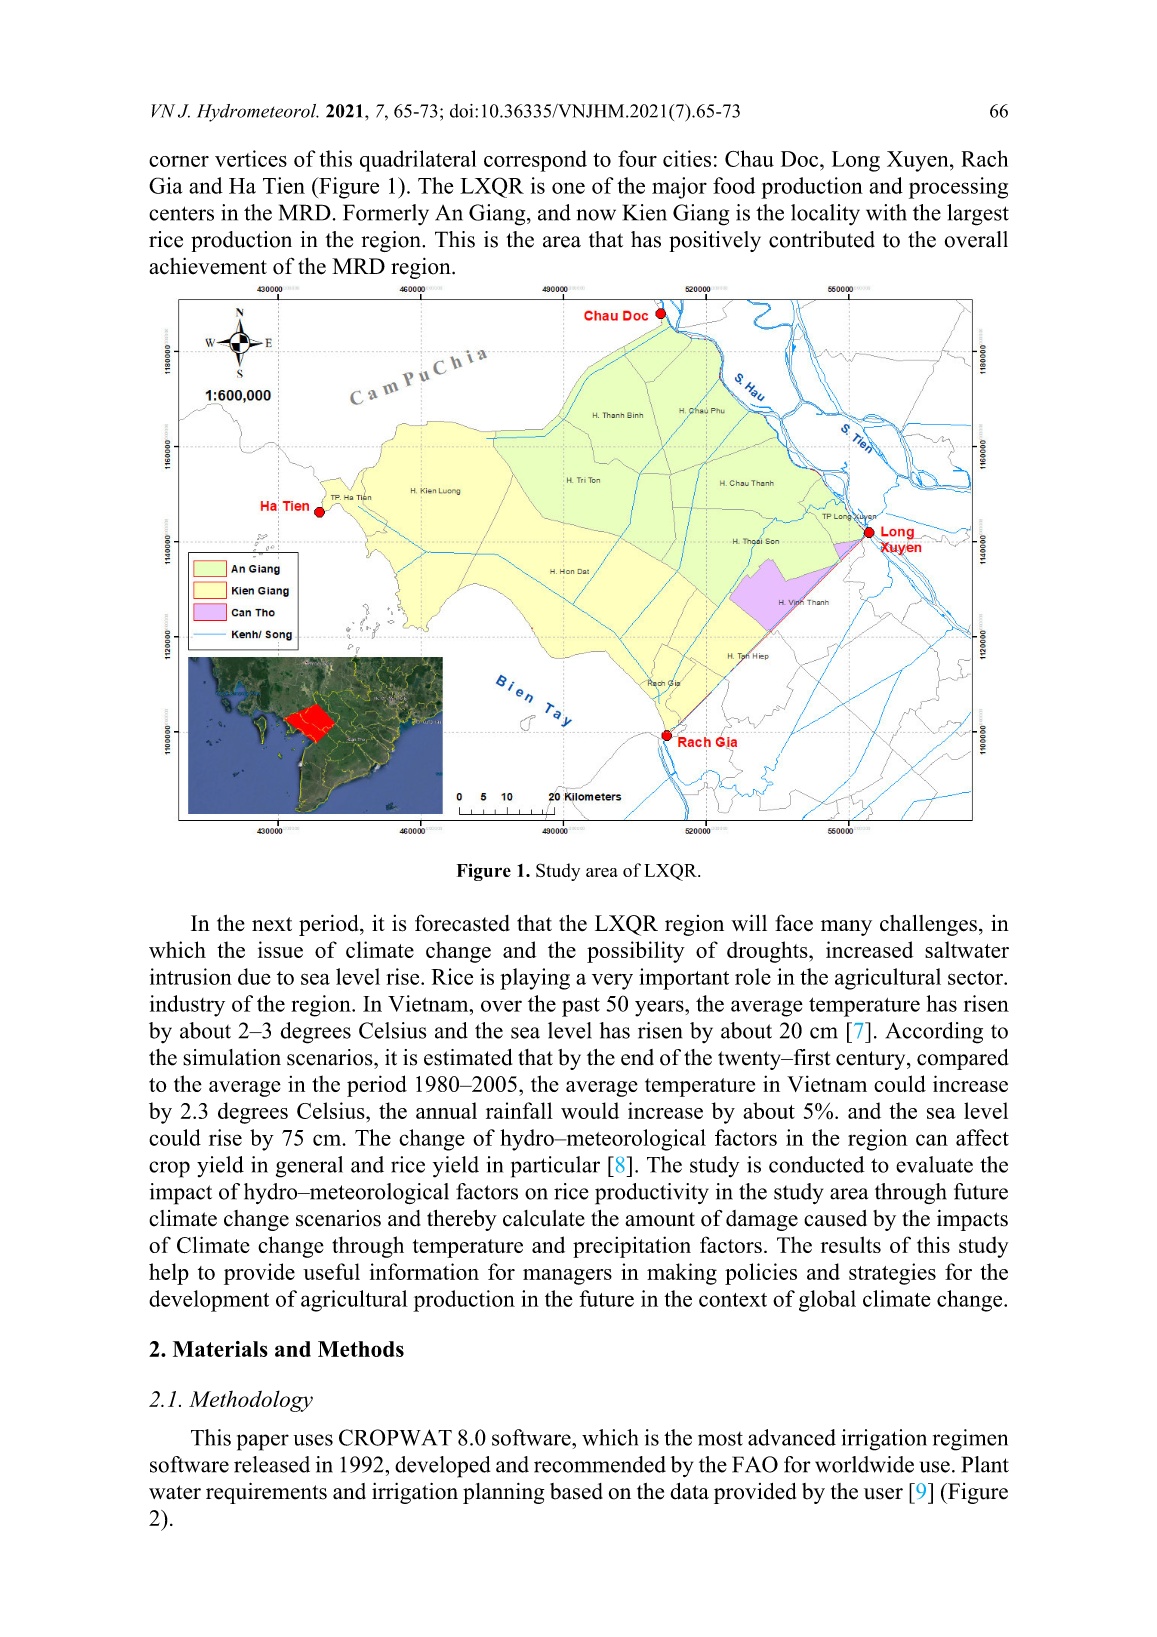 Study on assessing the impact of climate change (Temperature and Rainfall) on rice yield in the Long Xuyen Quadrangle region (LXQR) – Vietnam trang 2